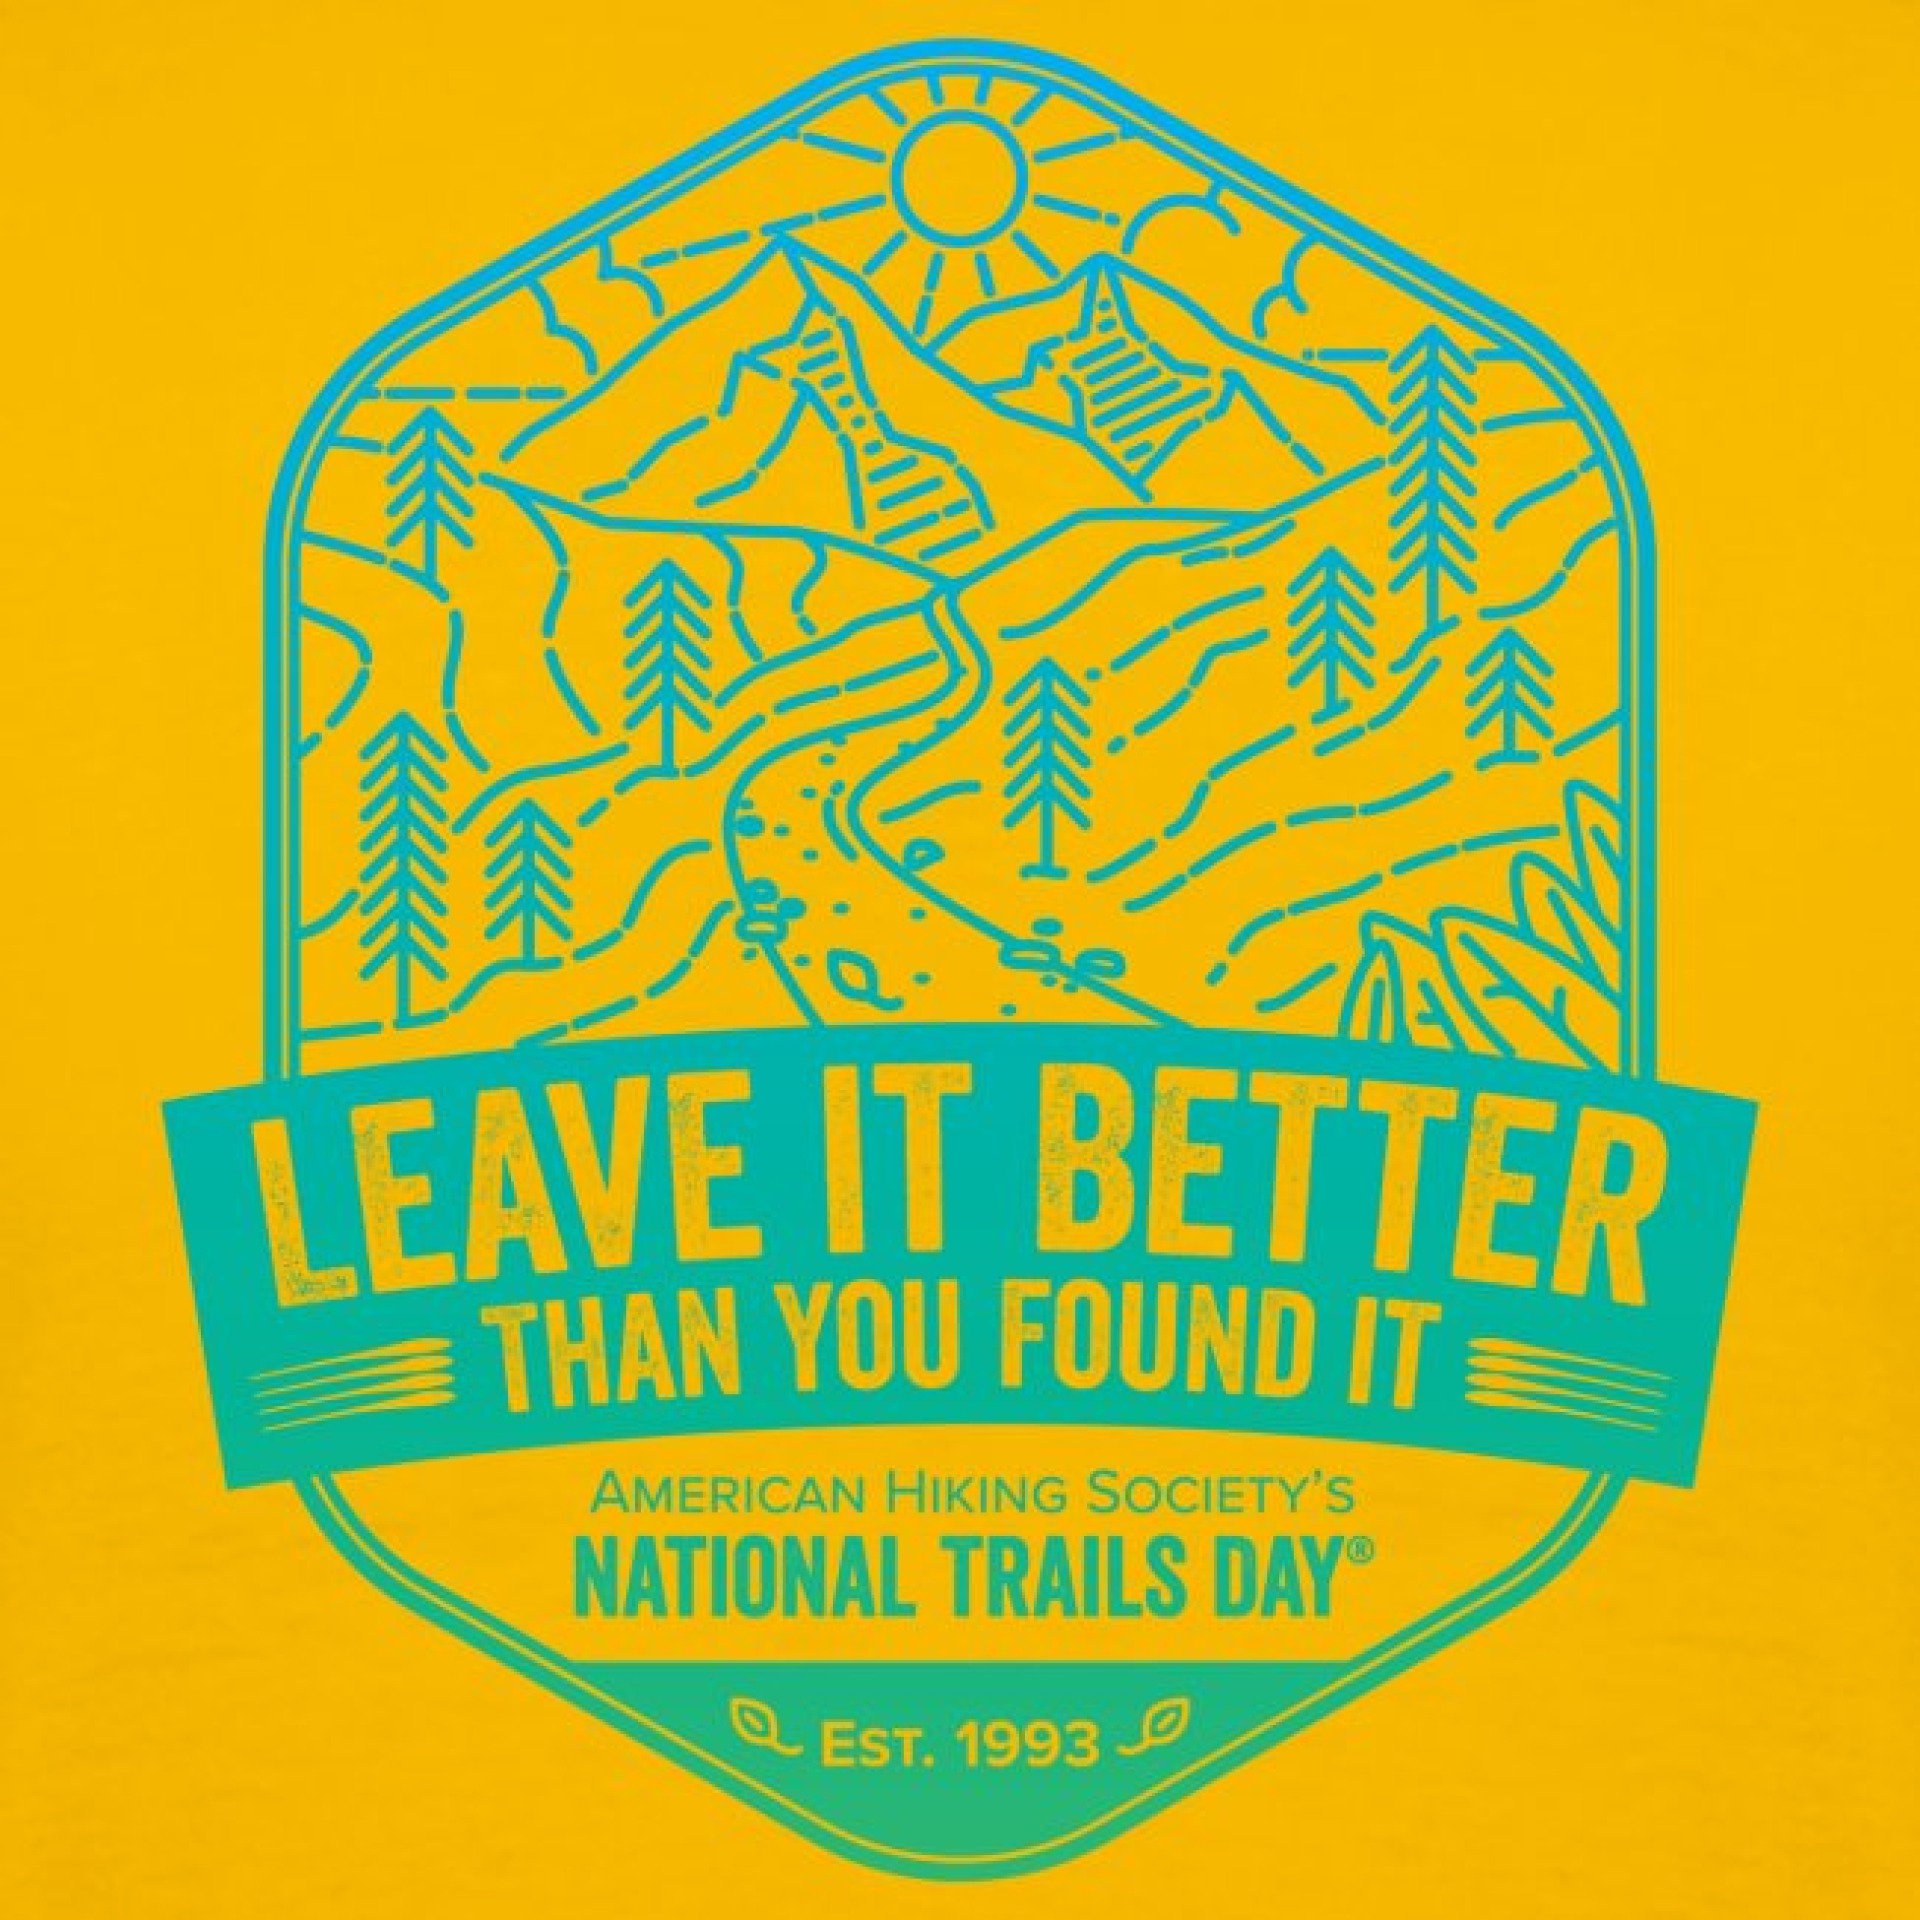 National Trails Day - Leave it better than you found it.